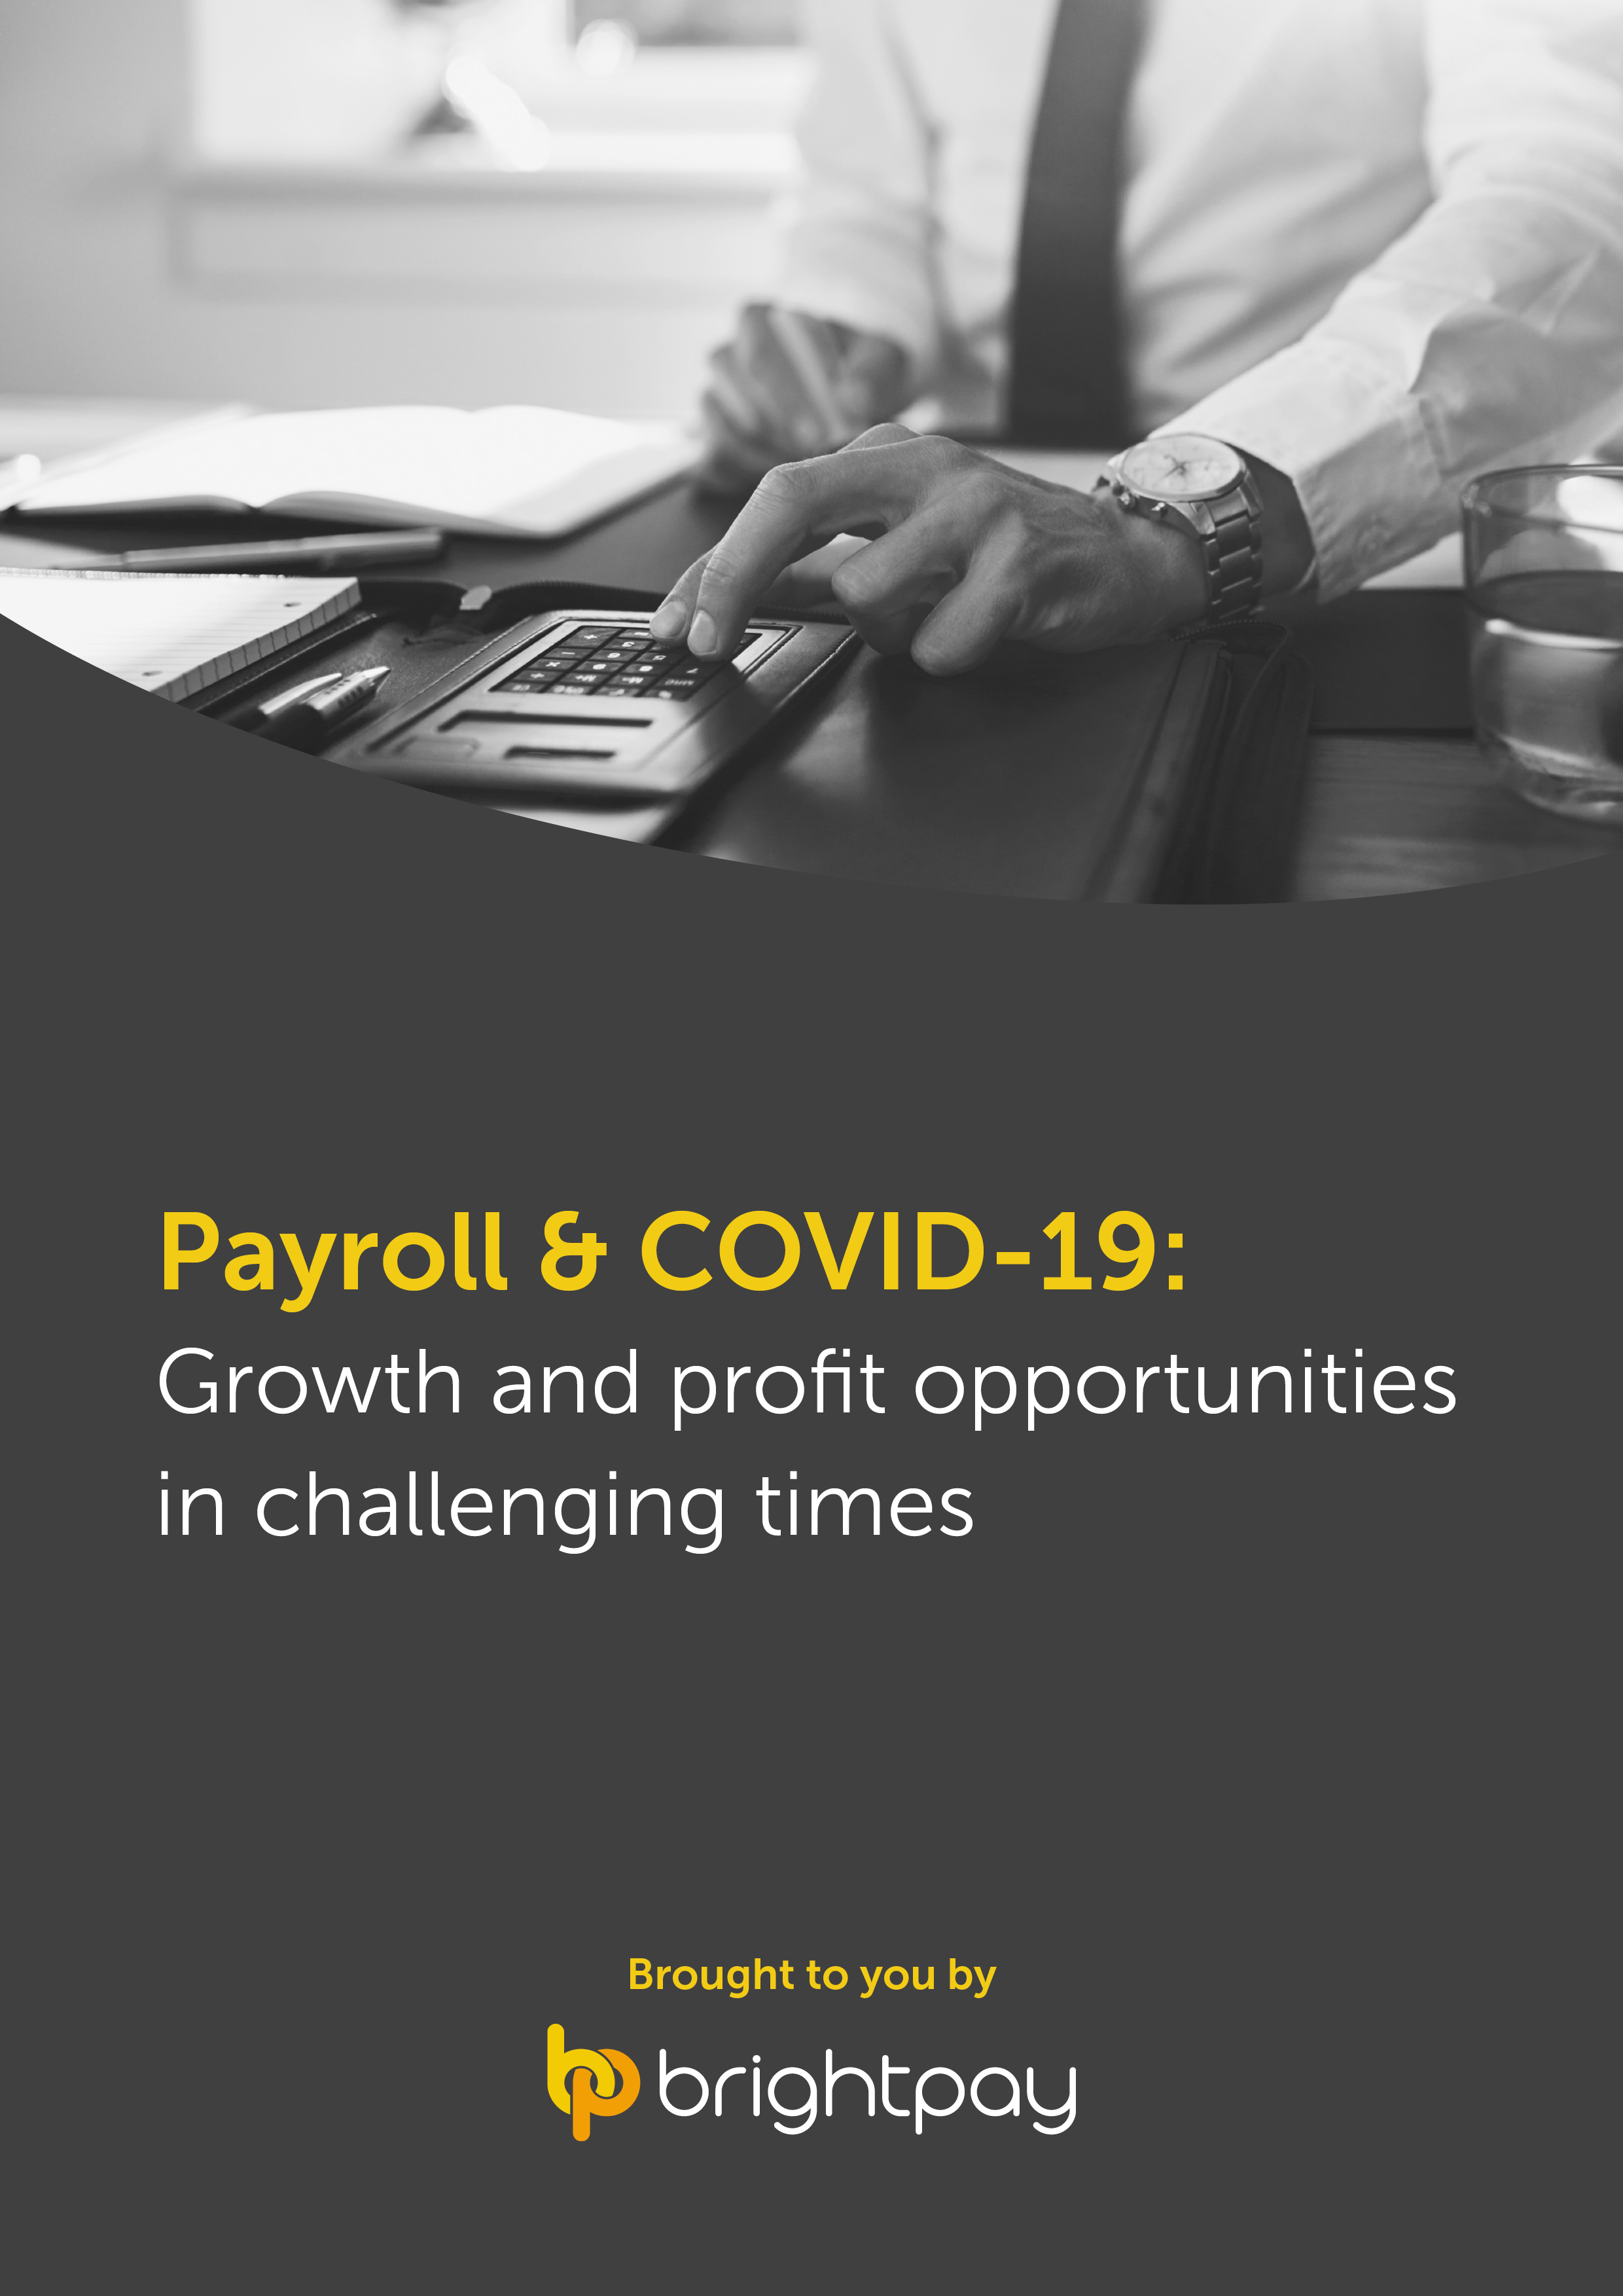 Safeguard your payroll against COVID-19